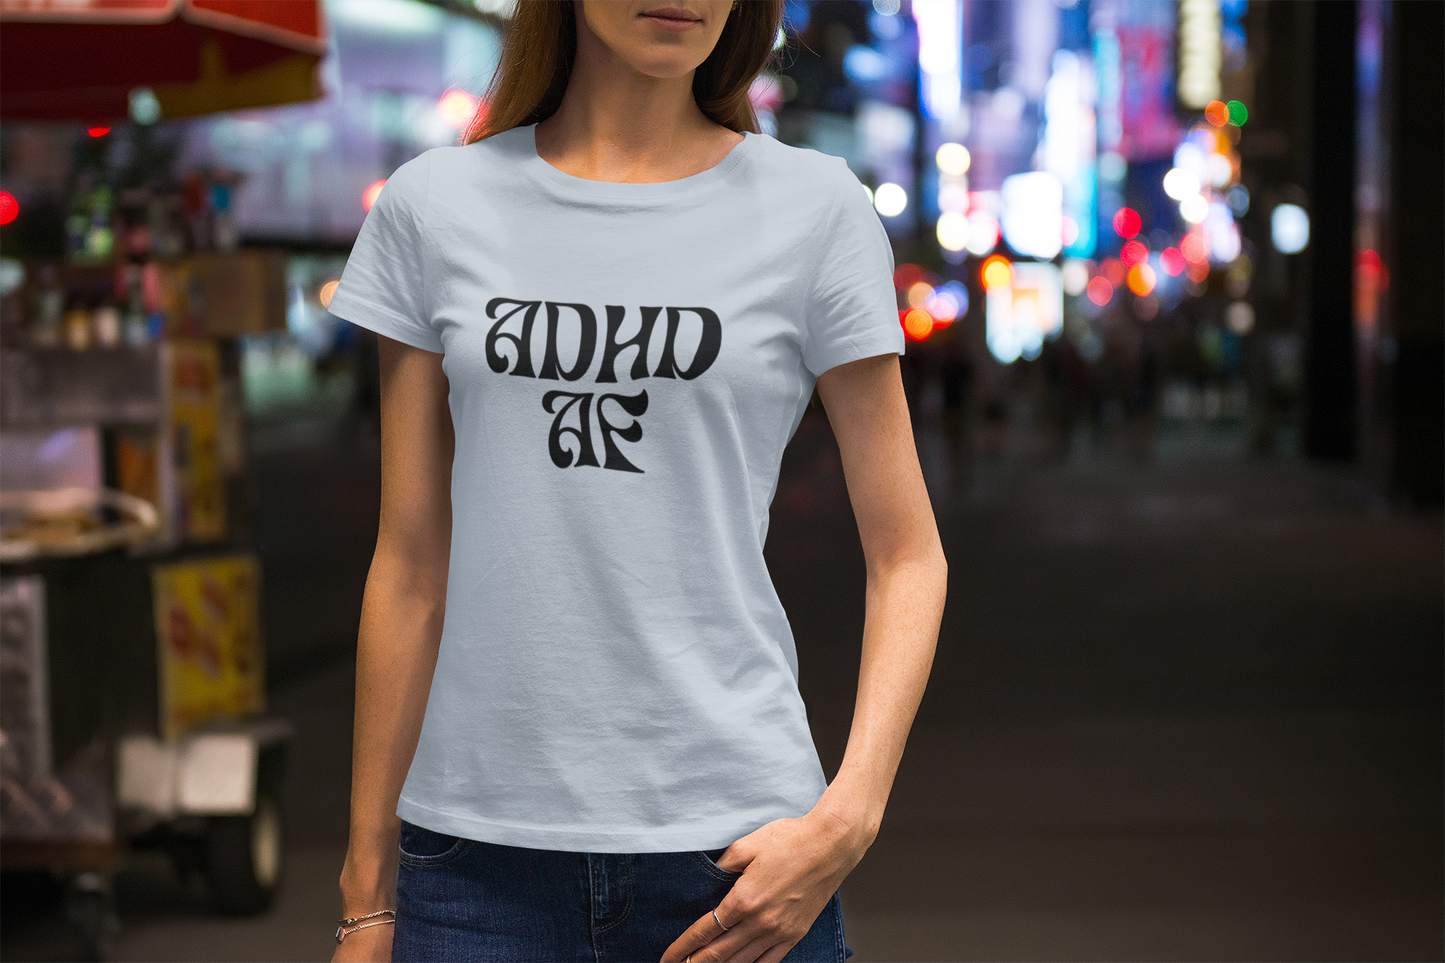 ADHD AF adult t-shirt in the name of ADHD awareness